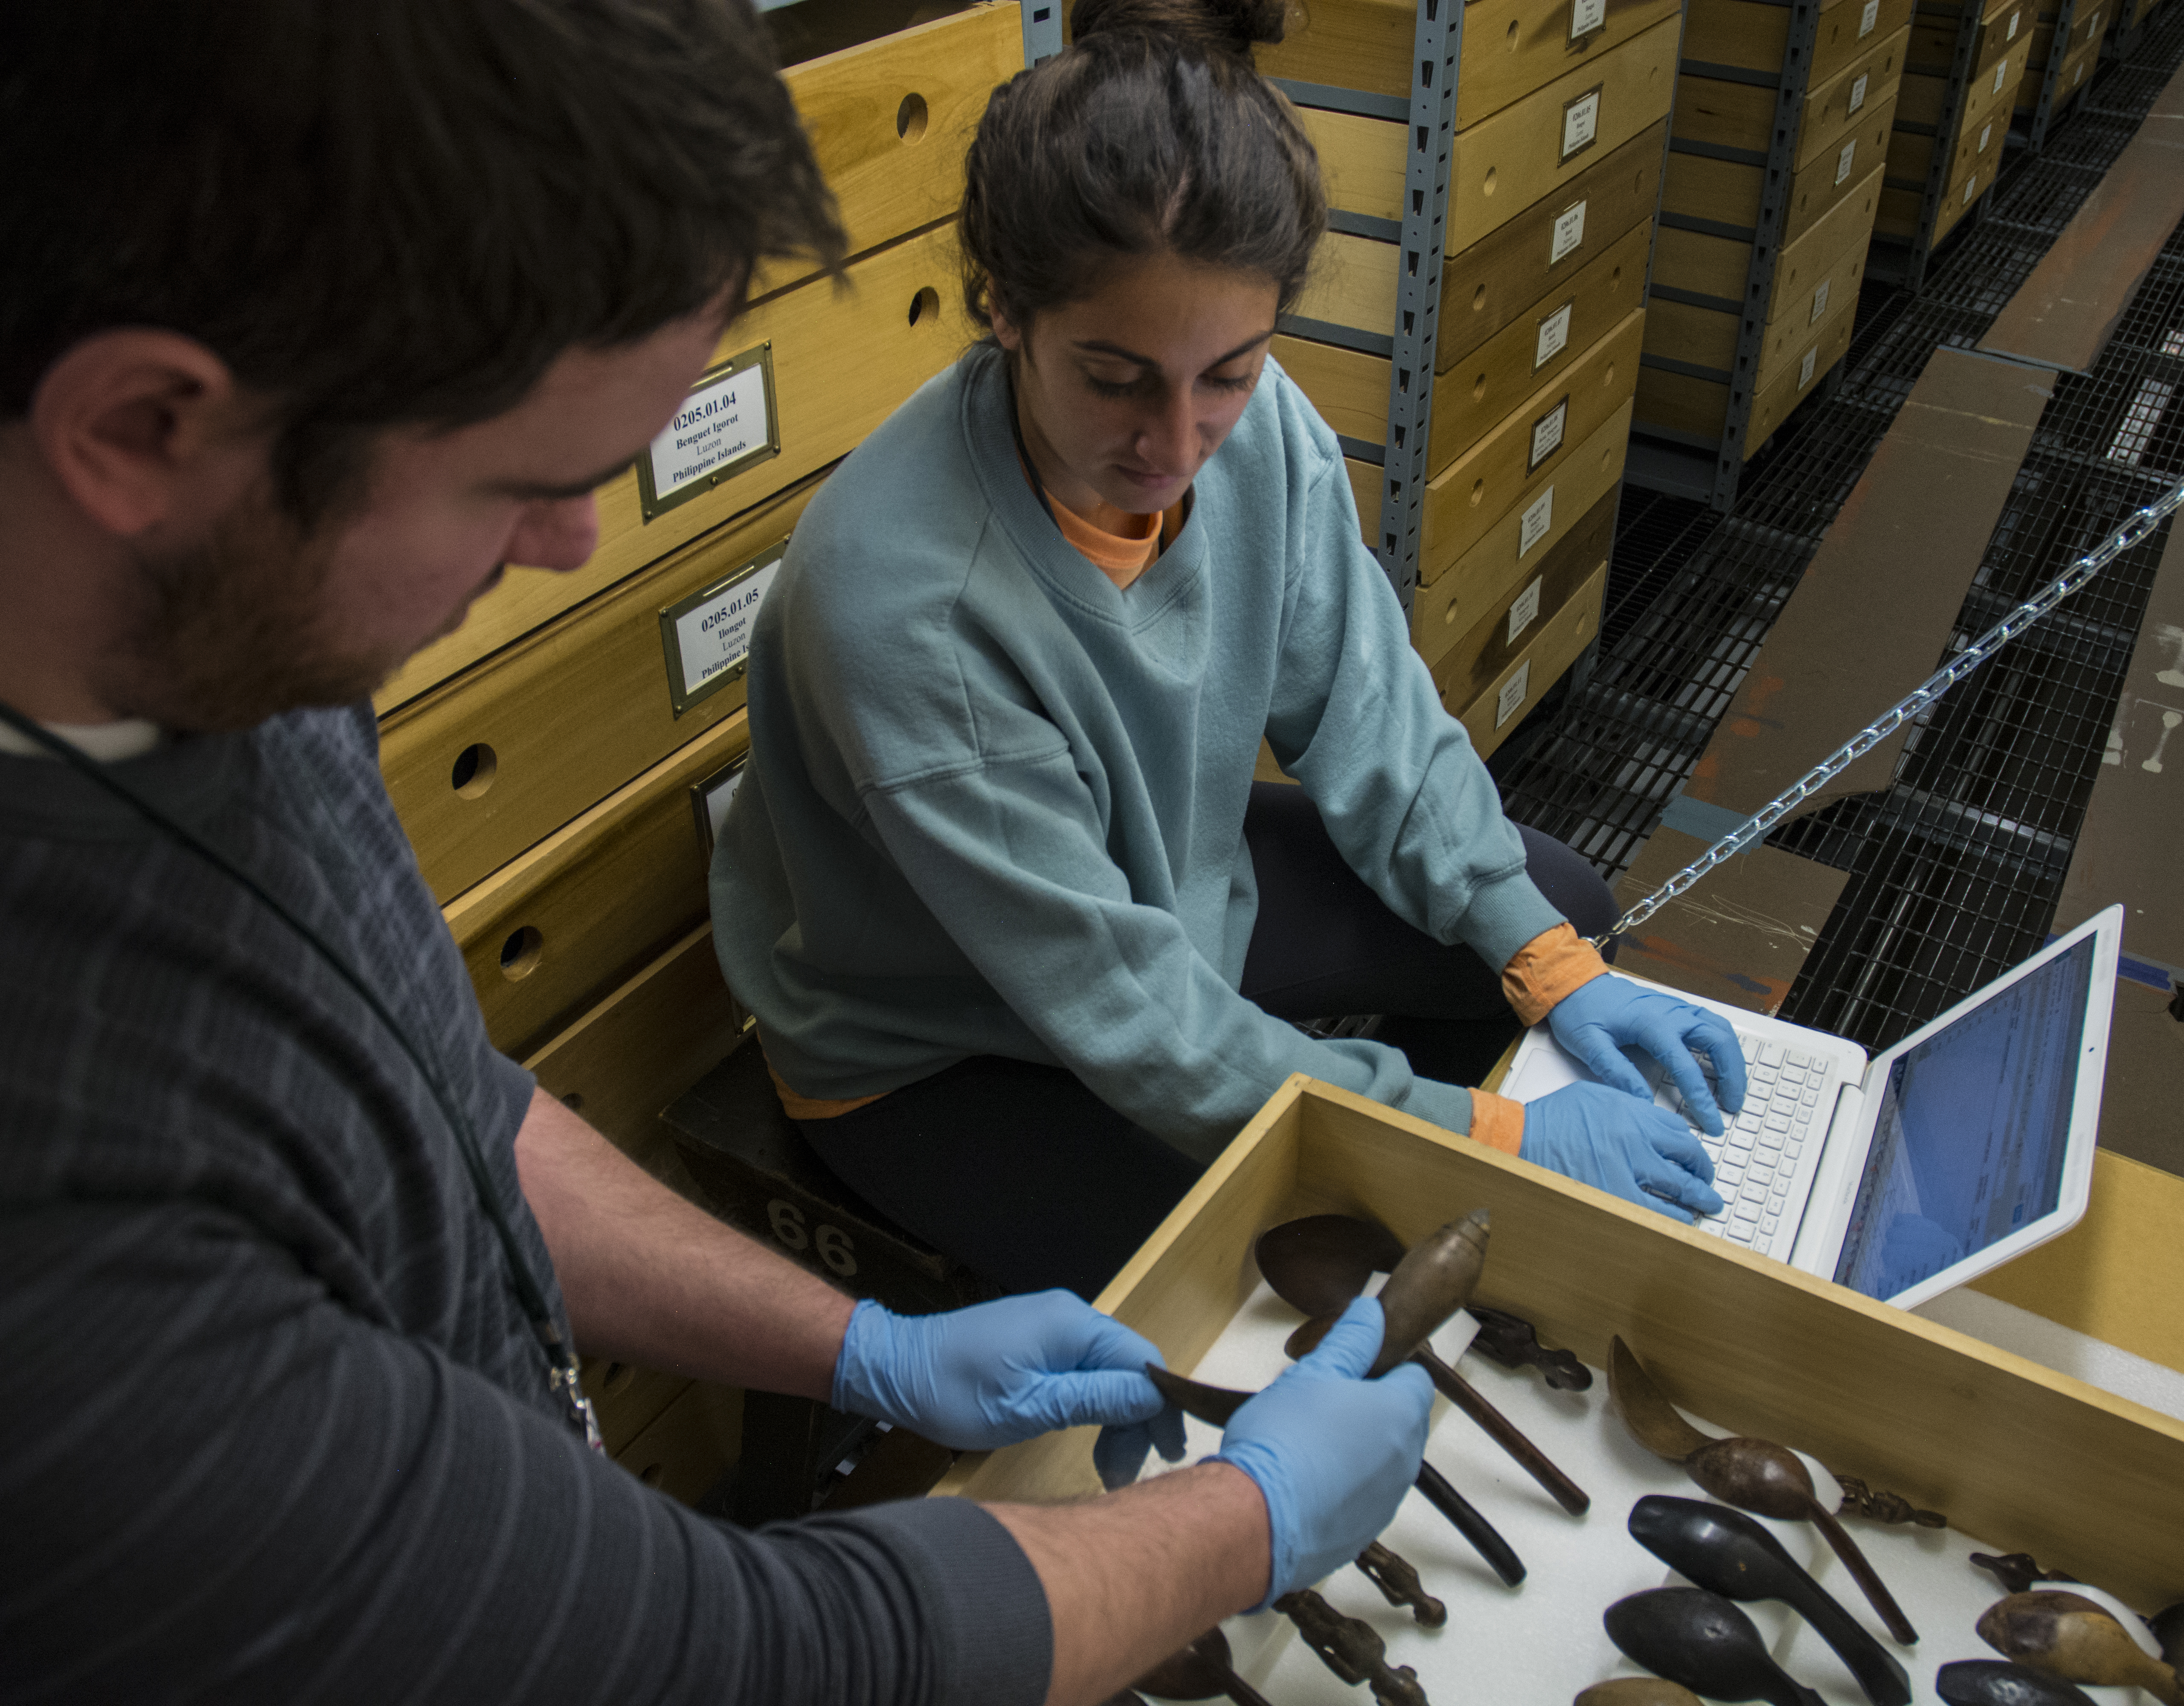 Image depicting volunteers Dustin Weddle and Bronwen Phillips inventorying objects within CAS Mezzanine storeroom. Selected for use on the homepage of the Philippine Heritage Collections interactive web portal. (c) Field Museum of Natural History - CC BY-NC 4.0